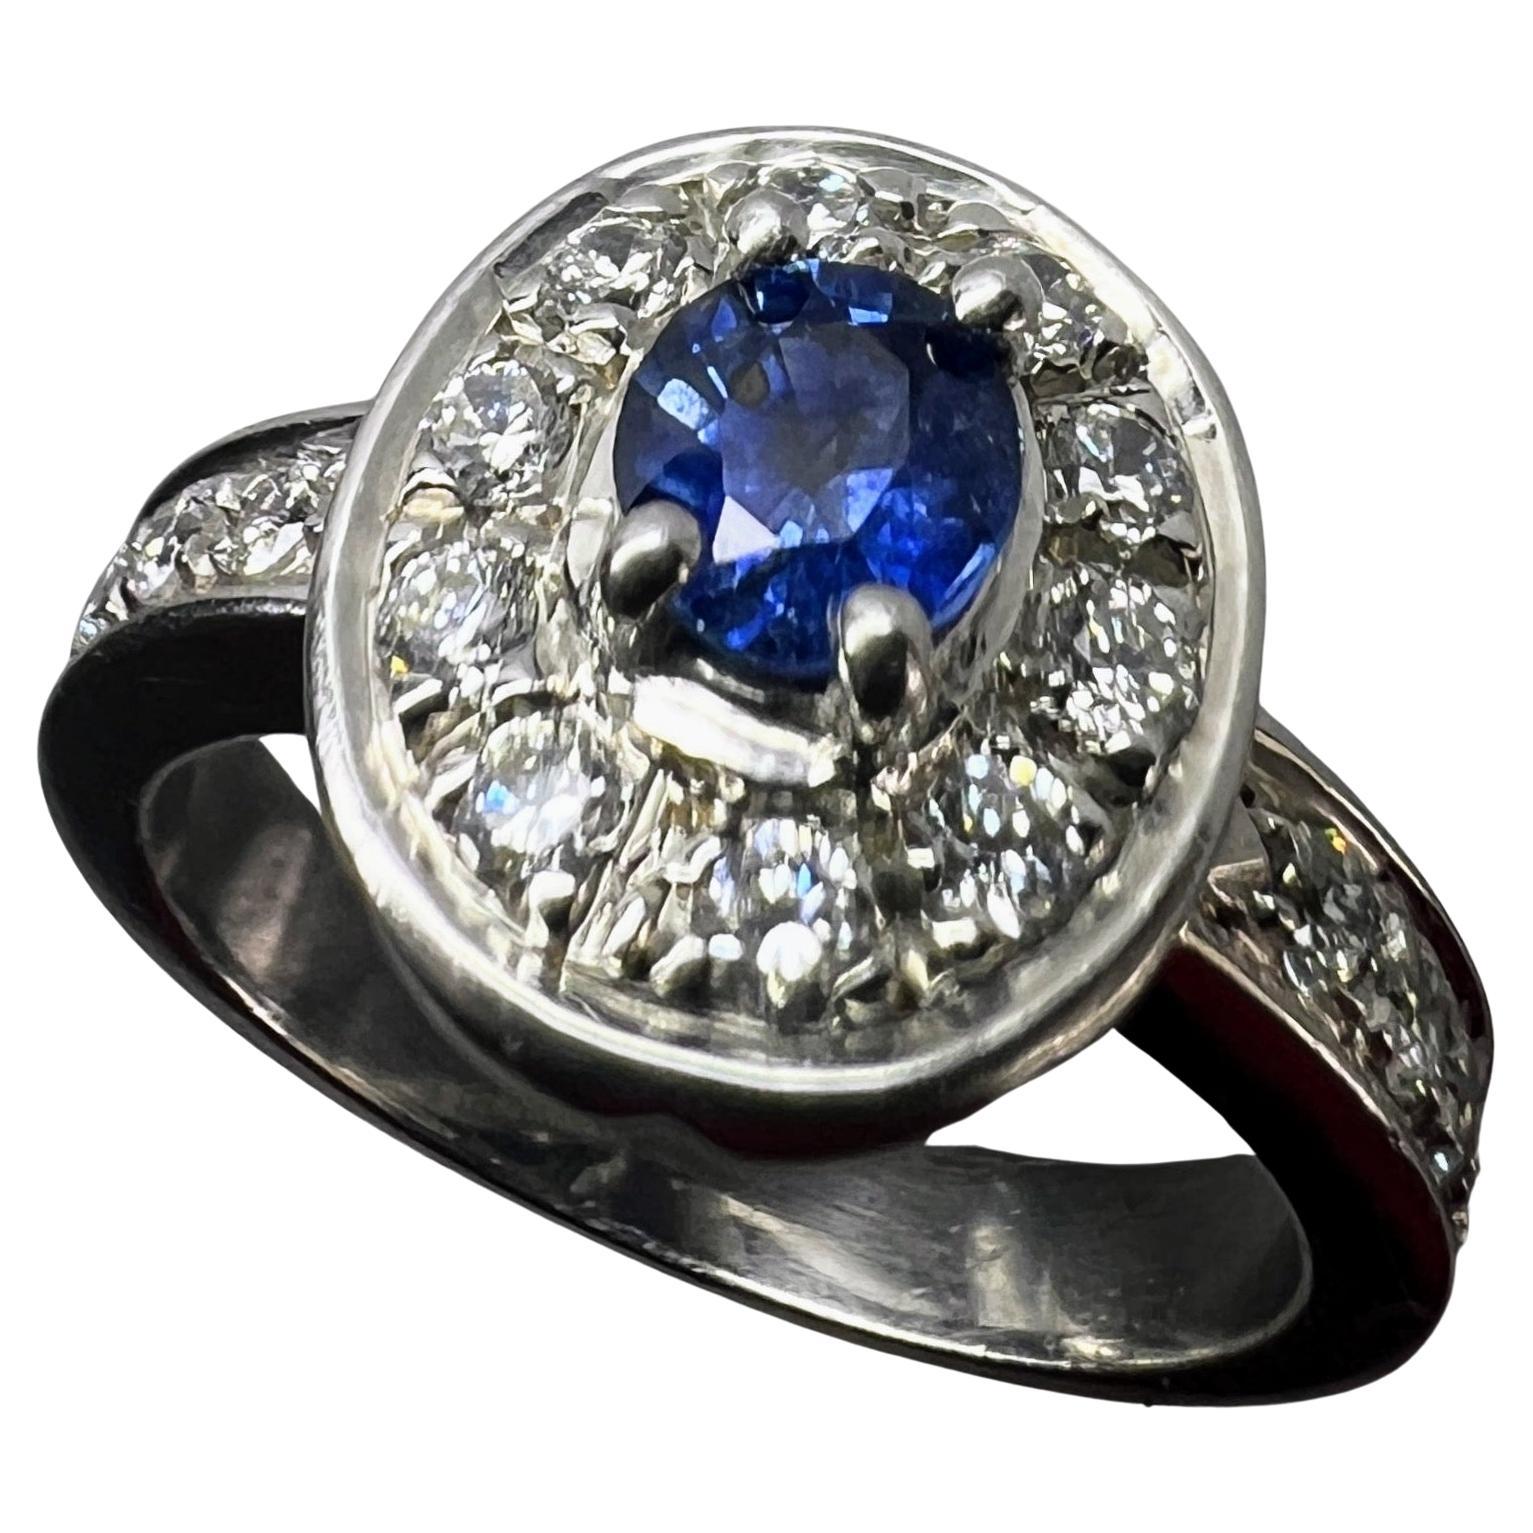 Celebrate your love story with our 1ct Natural Oval Blue Sapphire Engagement Ring, a symbol of eternal commitment and exquisite beauty. This stunning ring features a 1ct blue oval sapphire at its center, flanked by a radiant display of 10 sparkling